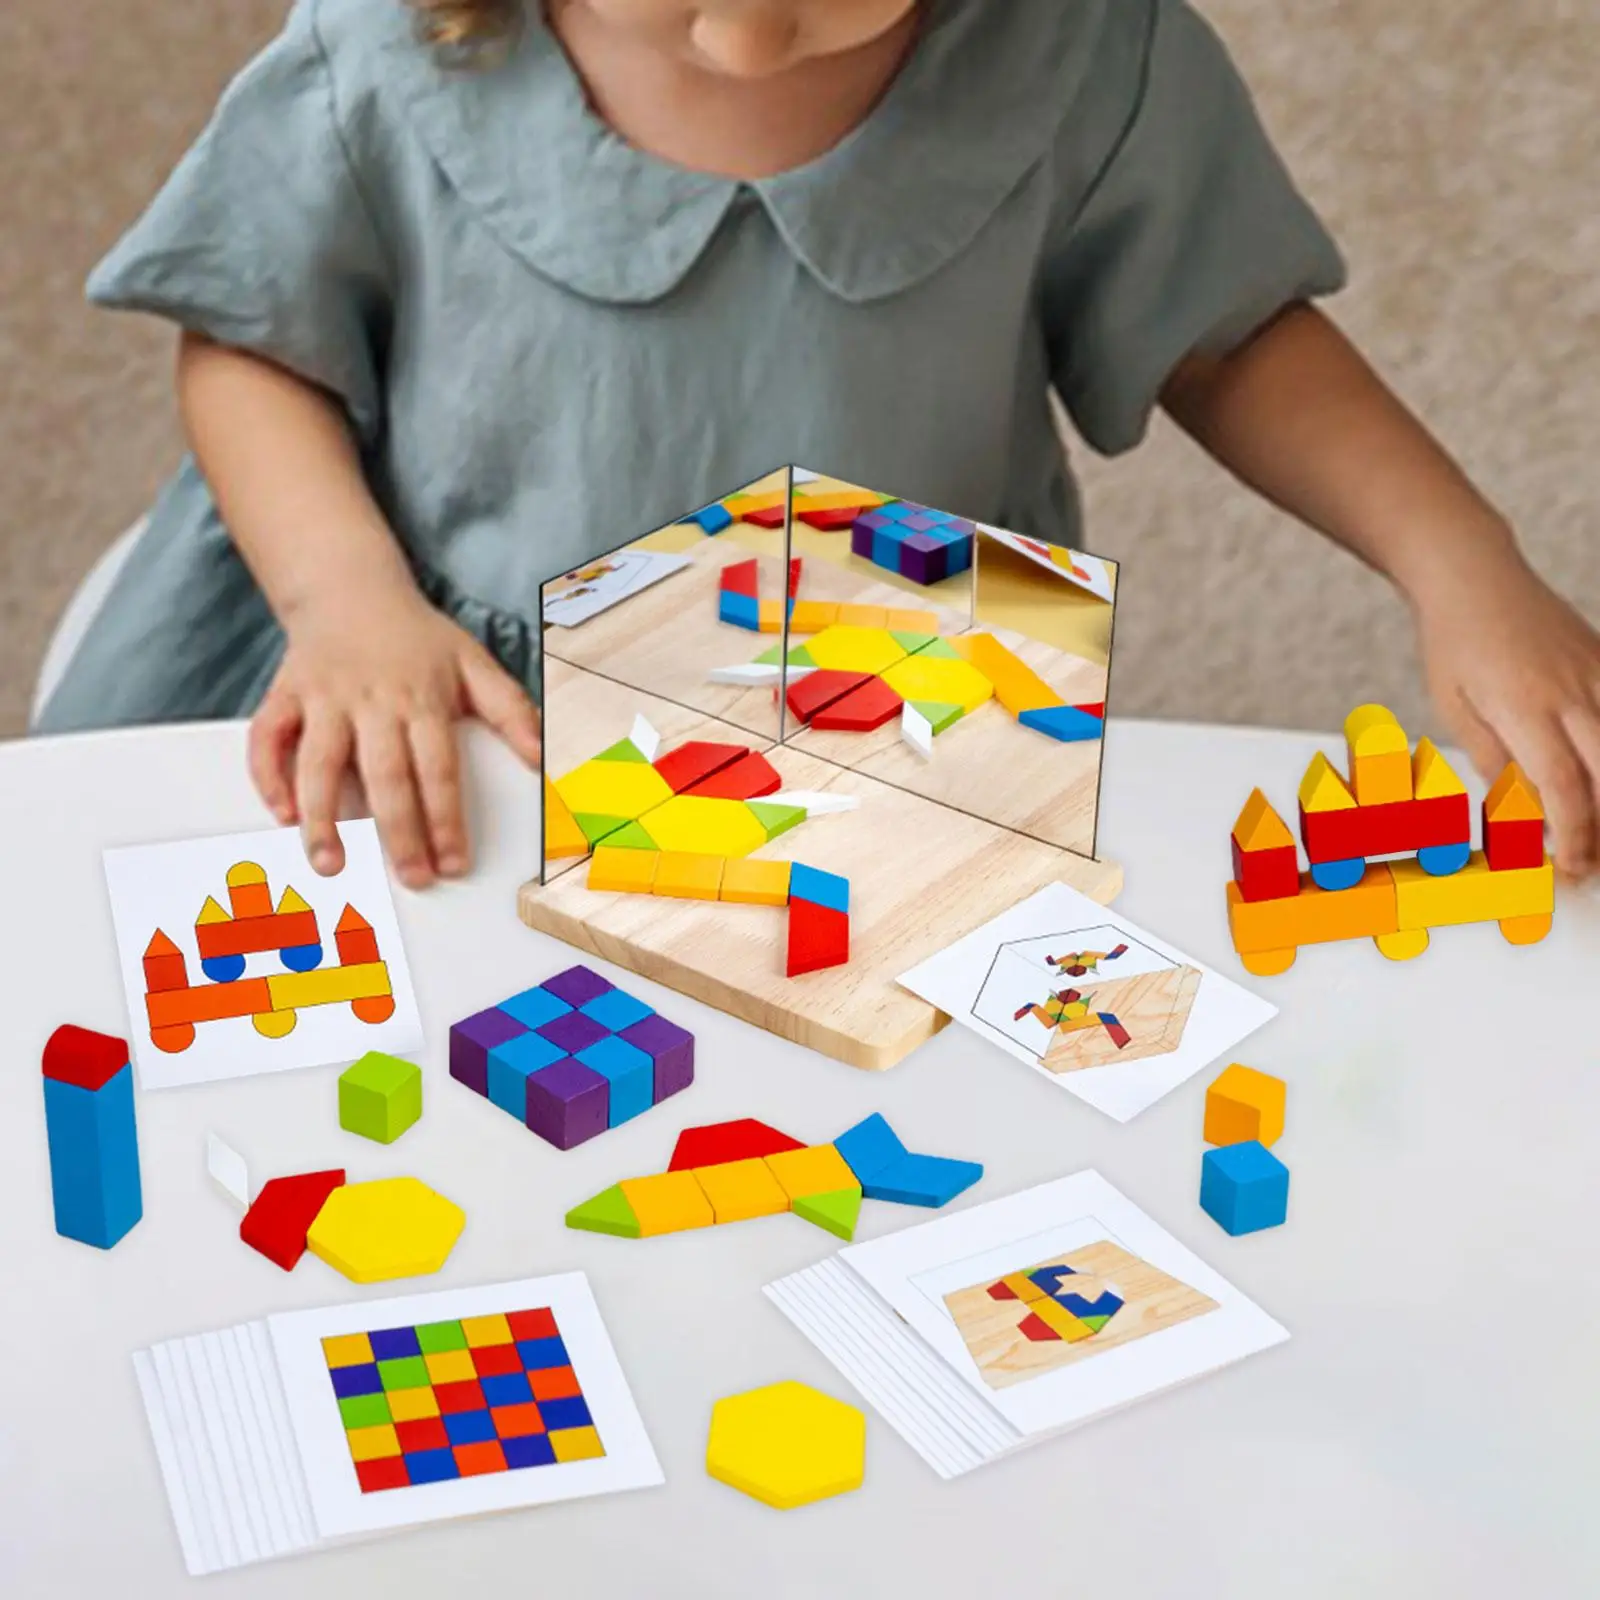 Mirror Imaging Puzzle Games Spatial Thinking Brain Development Space Imagination - £23.74 GBP